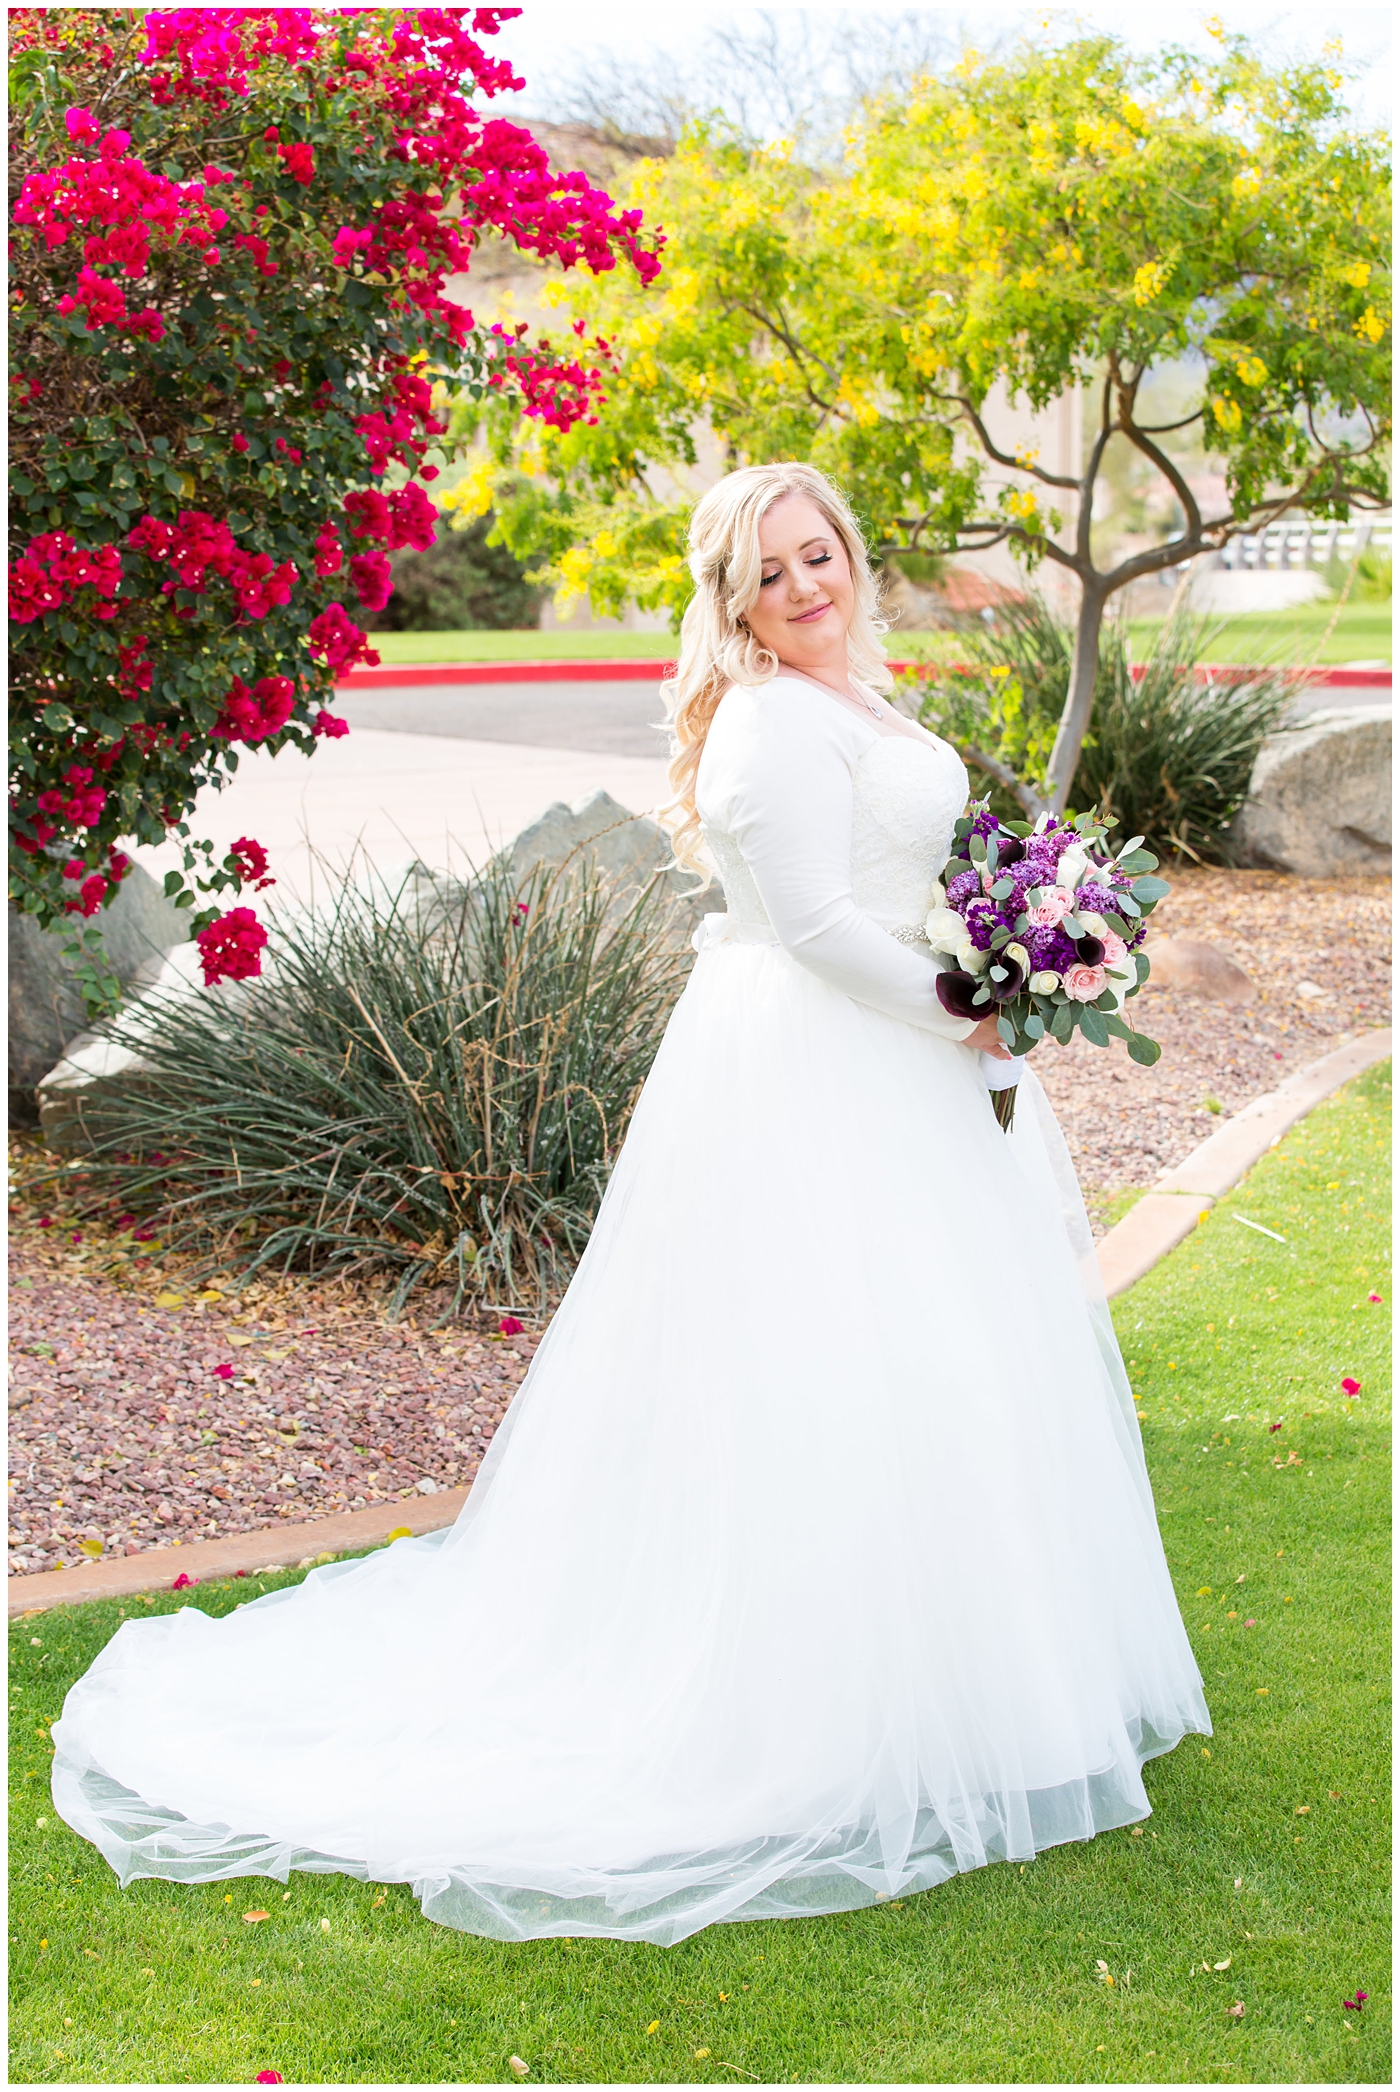 blonde bride in long sleeve wedding dress with purple and white flower bouquet wedding day portrait